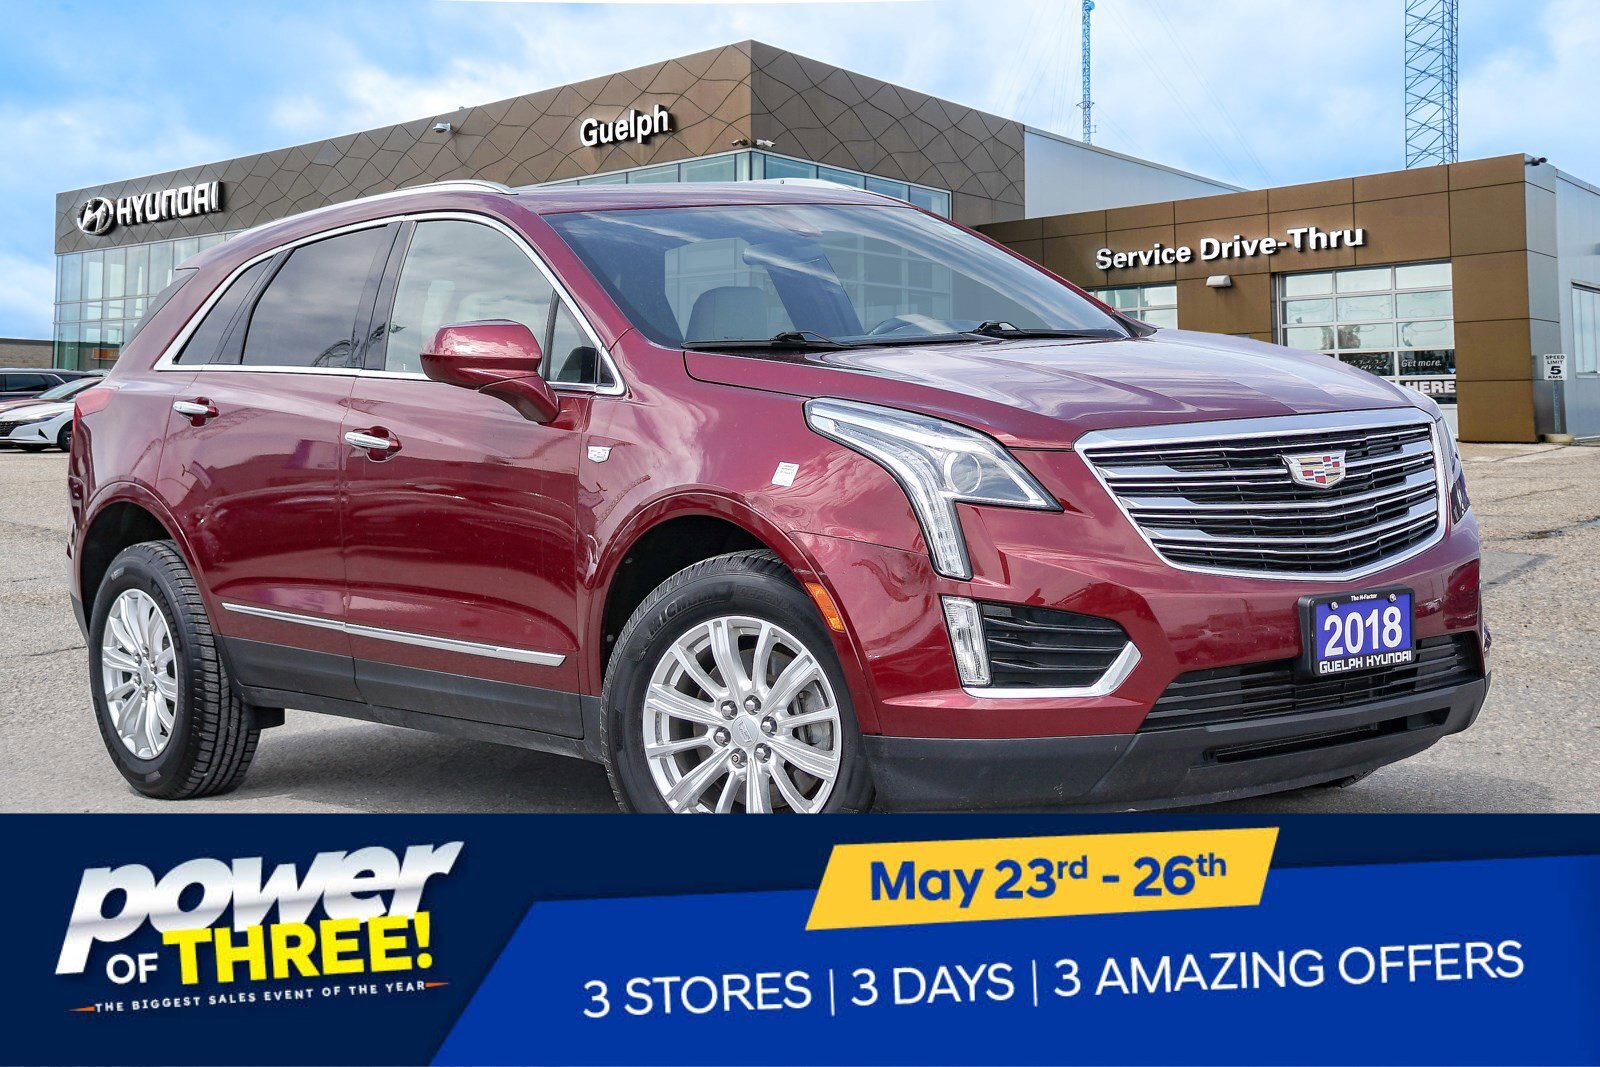 2018 Cadillac XT5 FWD | 3.6L V6 | WHITE LEATHER | BOSE AUDIO |